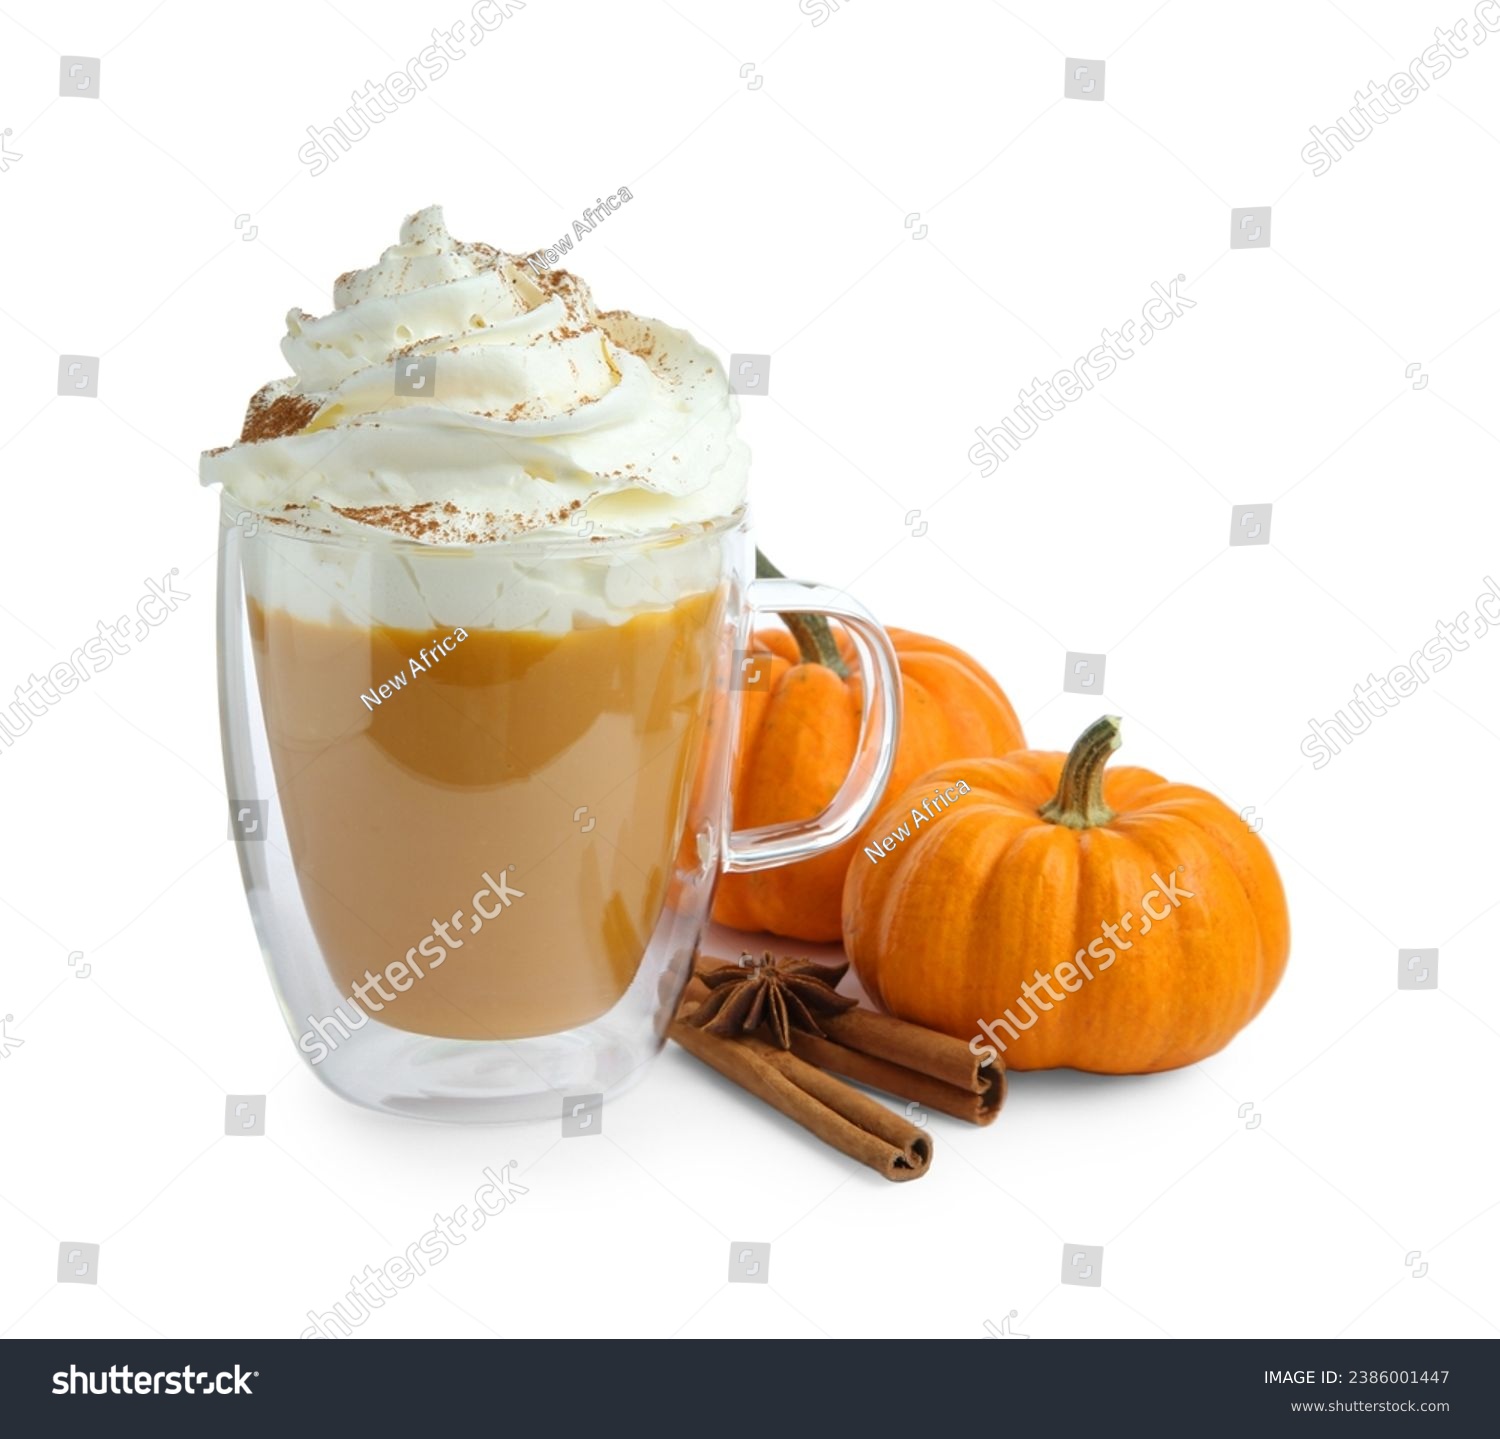 Cup of pumpkin spice latte with whipped cream, squashes and cinnamon sticks isolated on white #2386001447